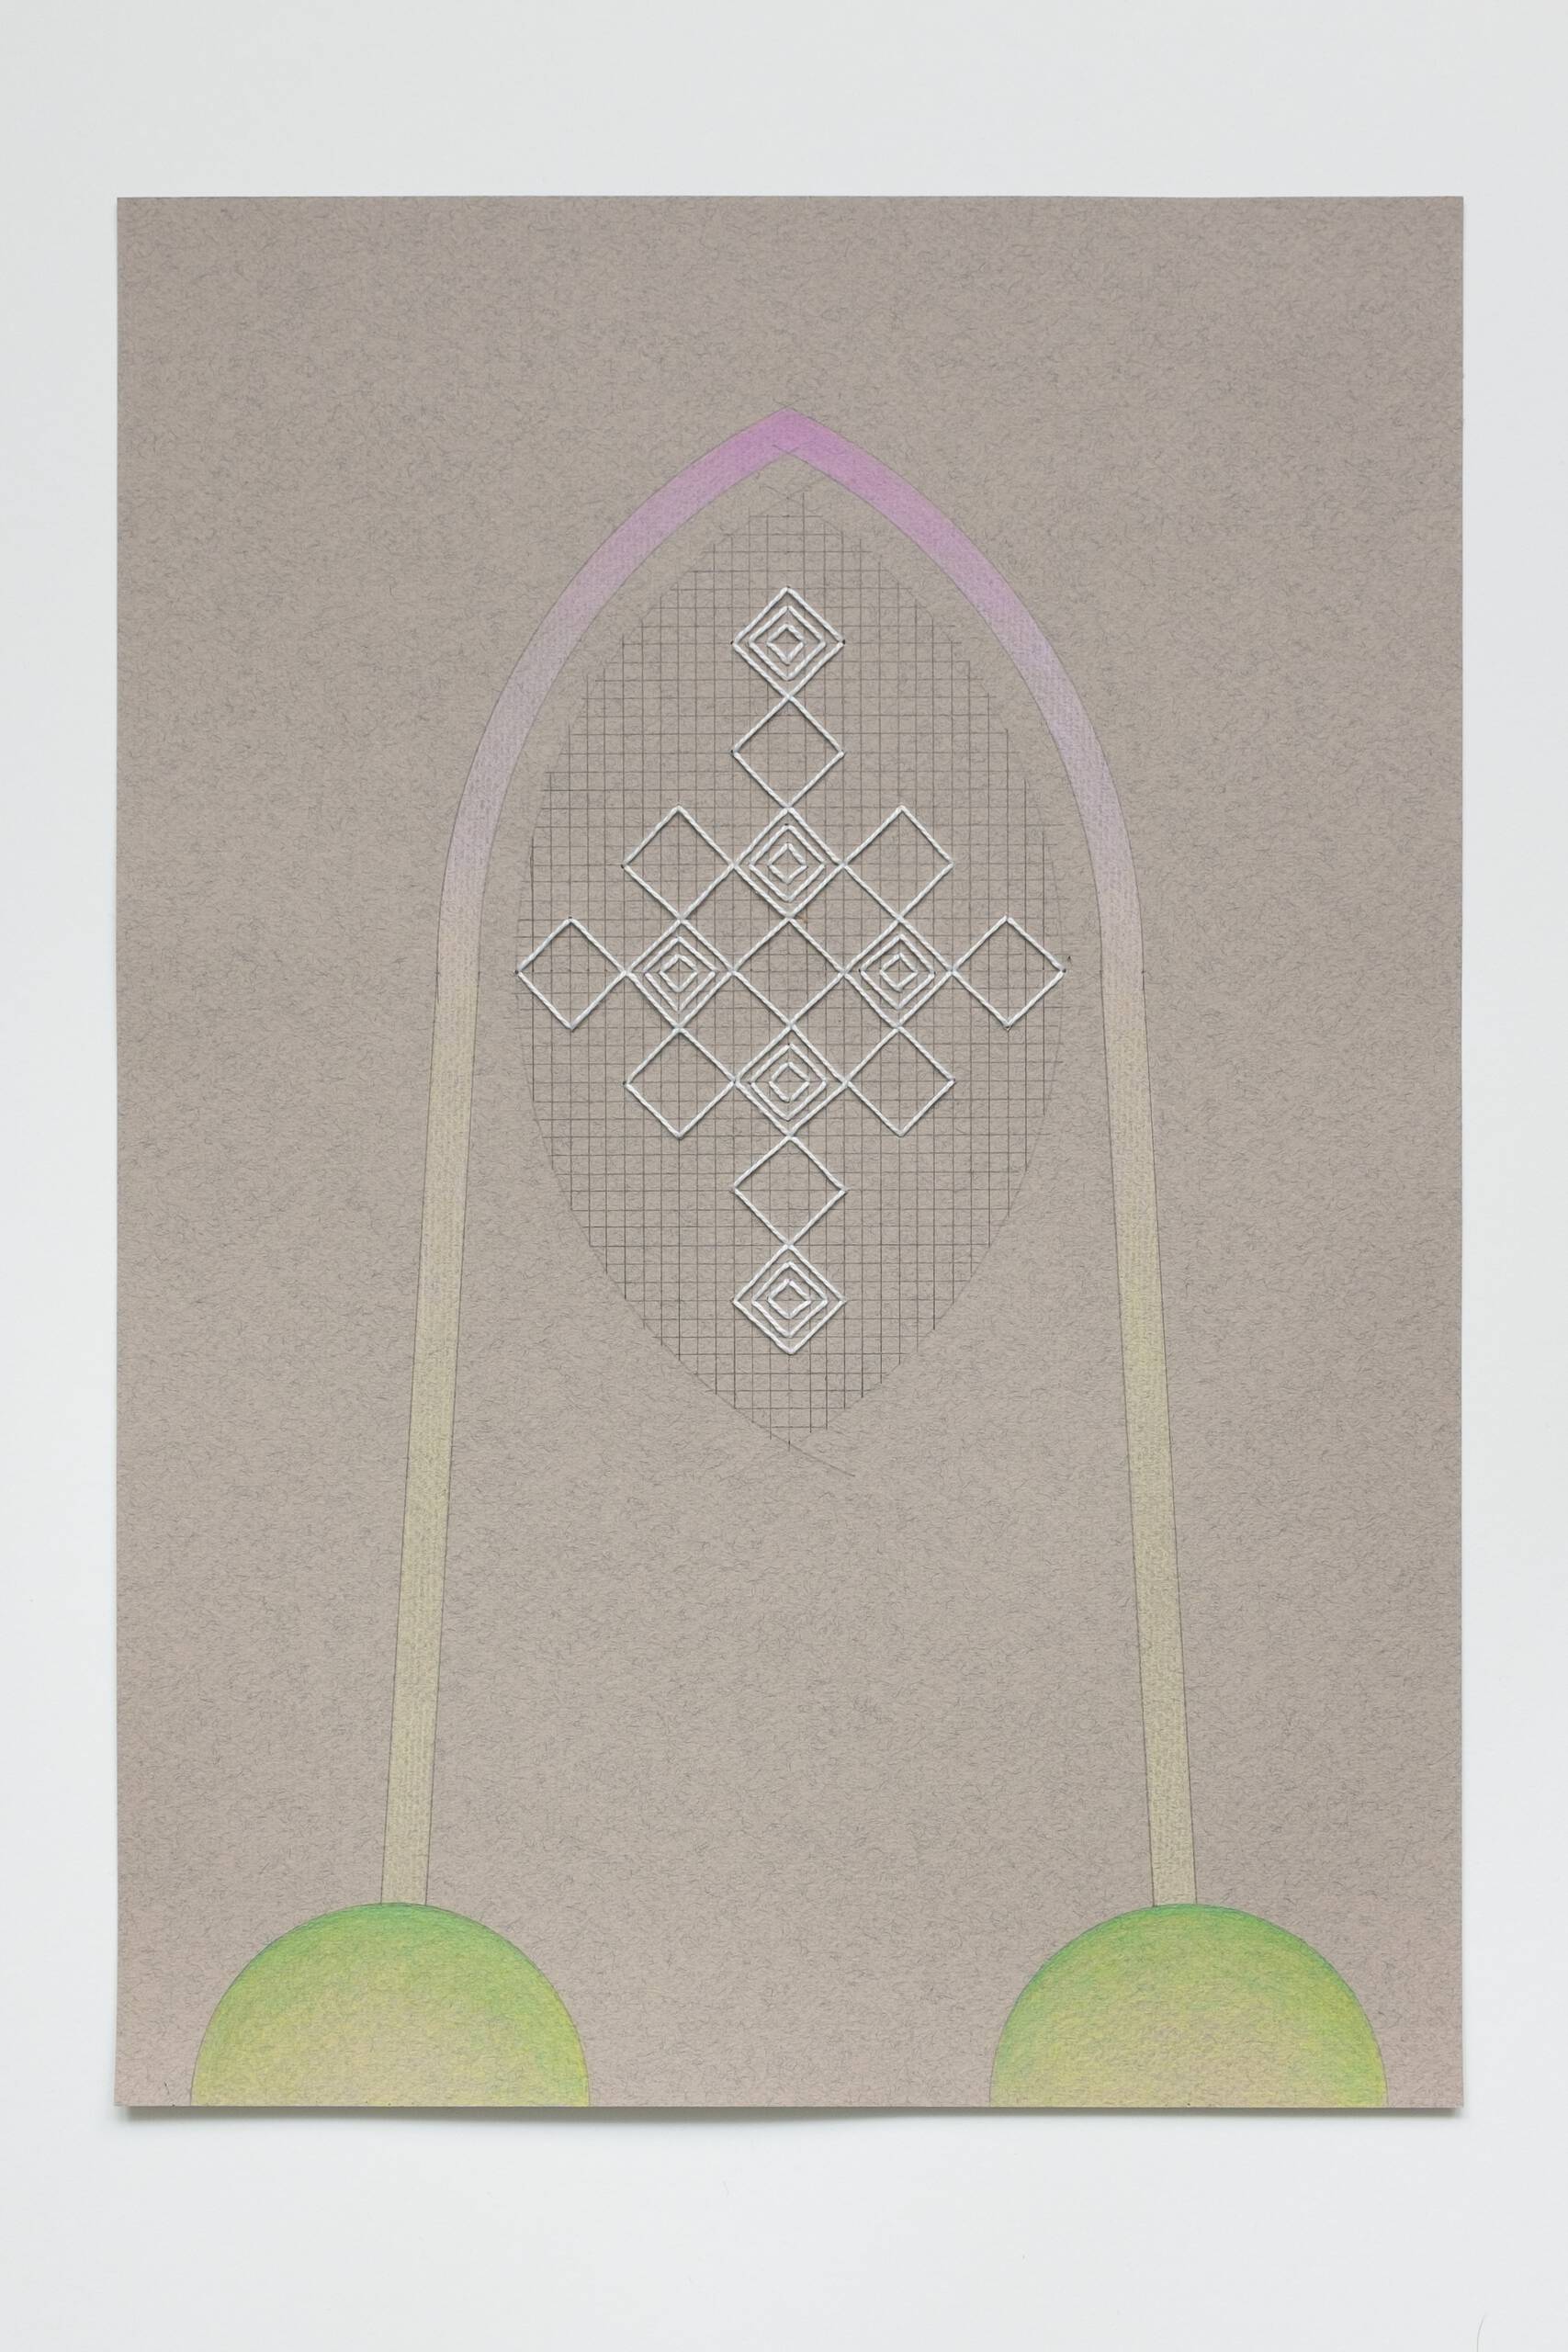 Bargello vesica piscis [white on grey], Hand-embroidered cotton, pencil and colored pencil on paper, 2020